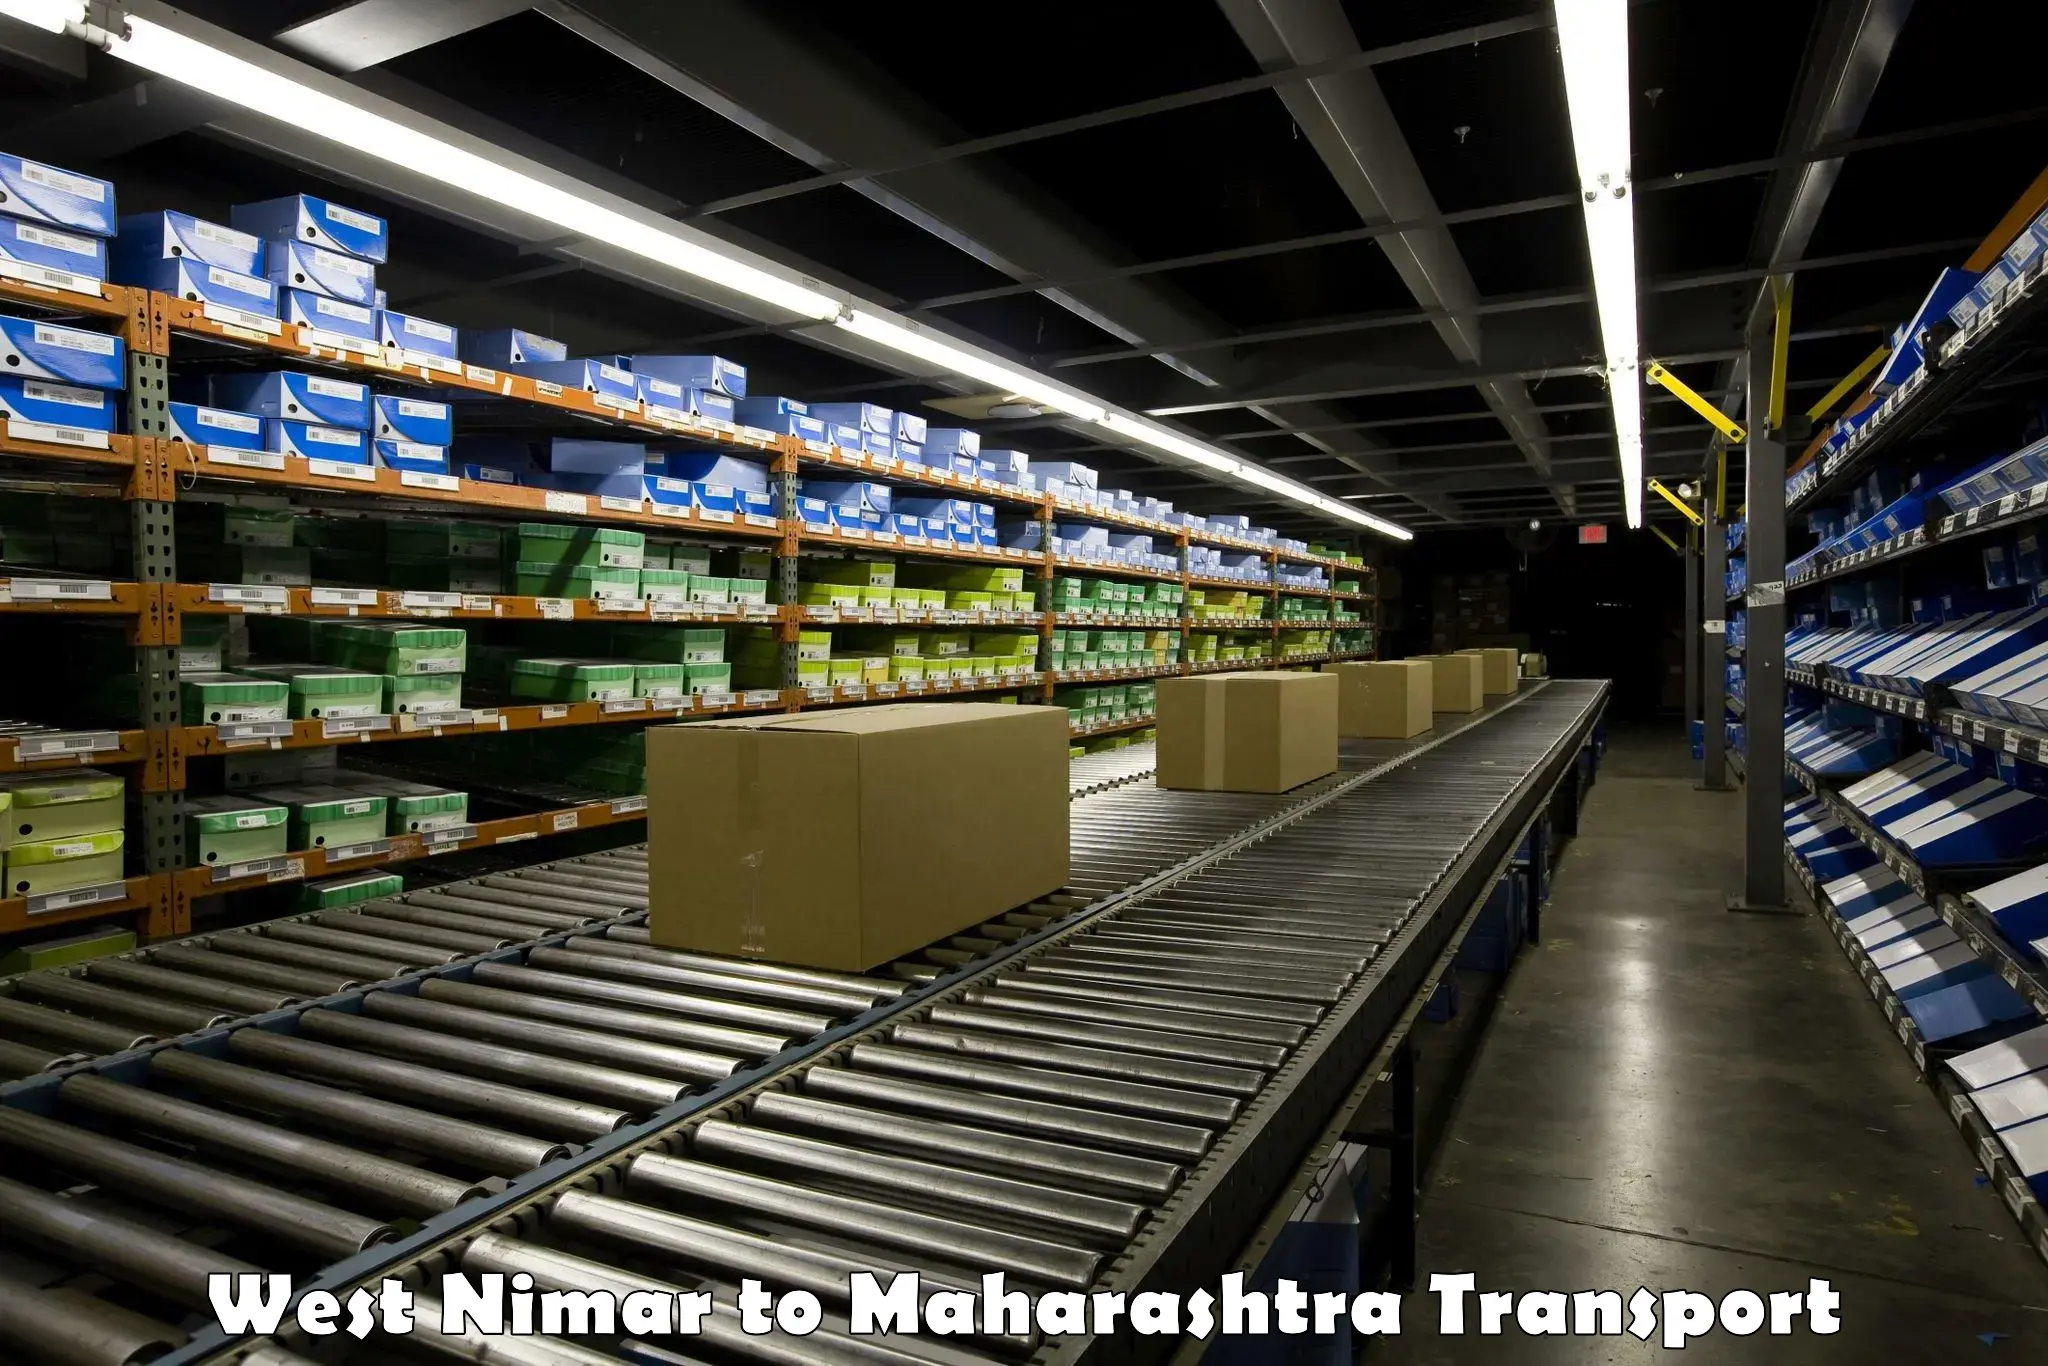 Shipping services in West Nimar to Dadar